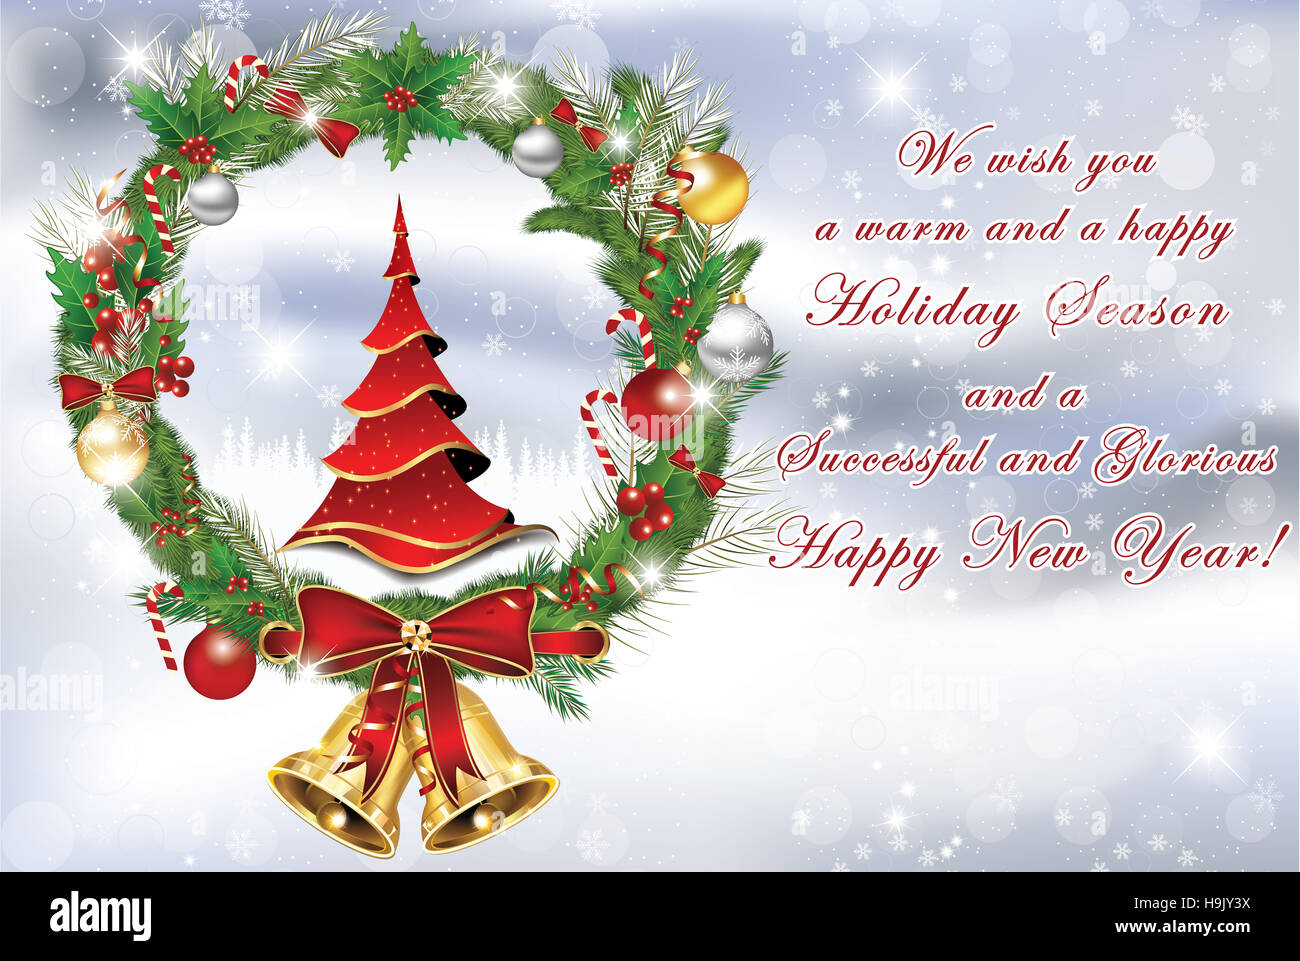 Business Christmas and New Year greeting card with Christmas tree ...